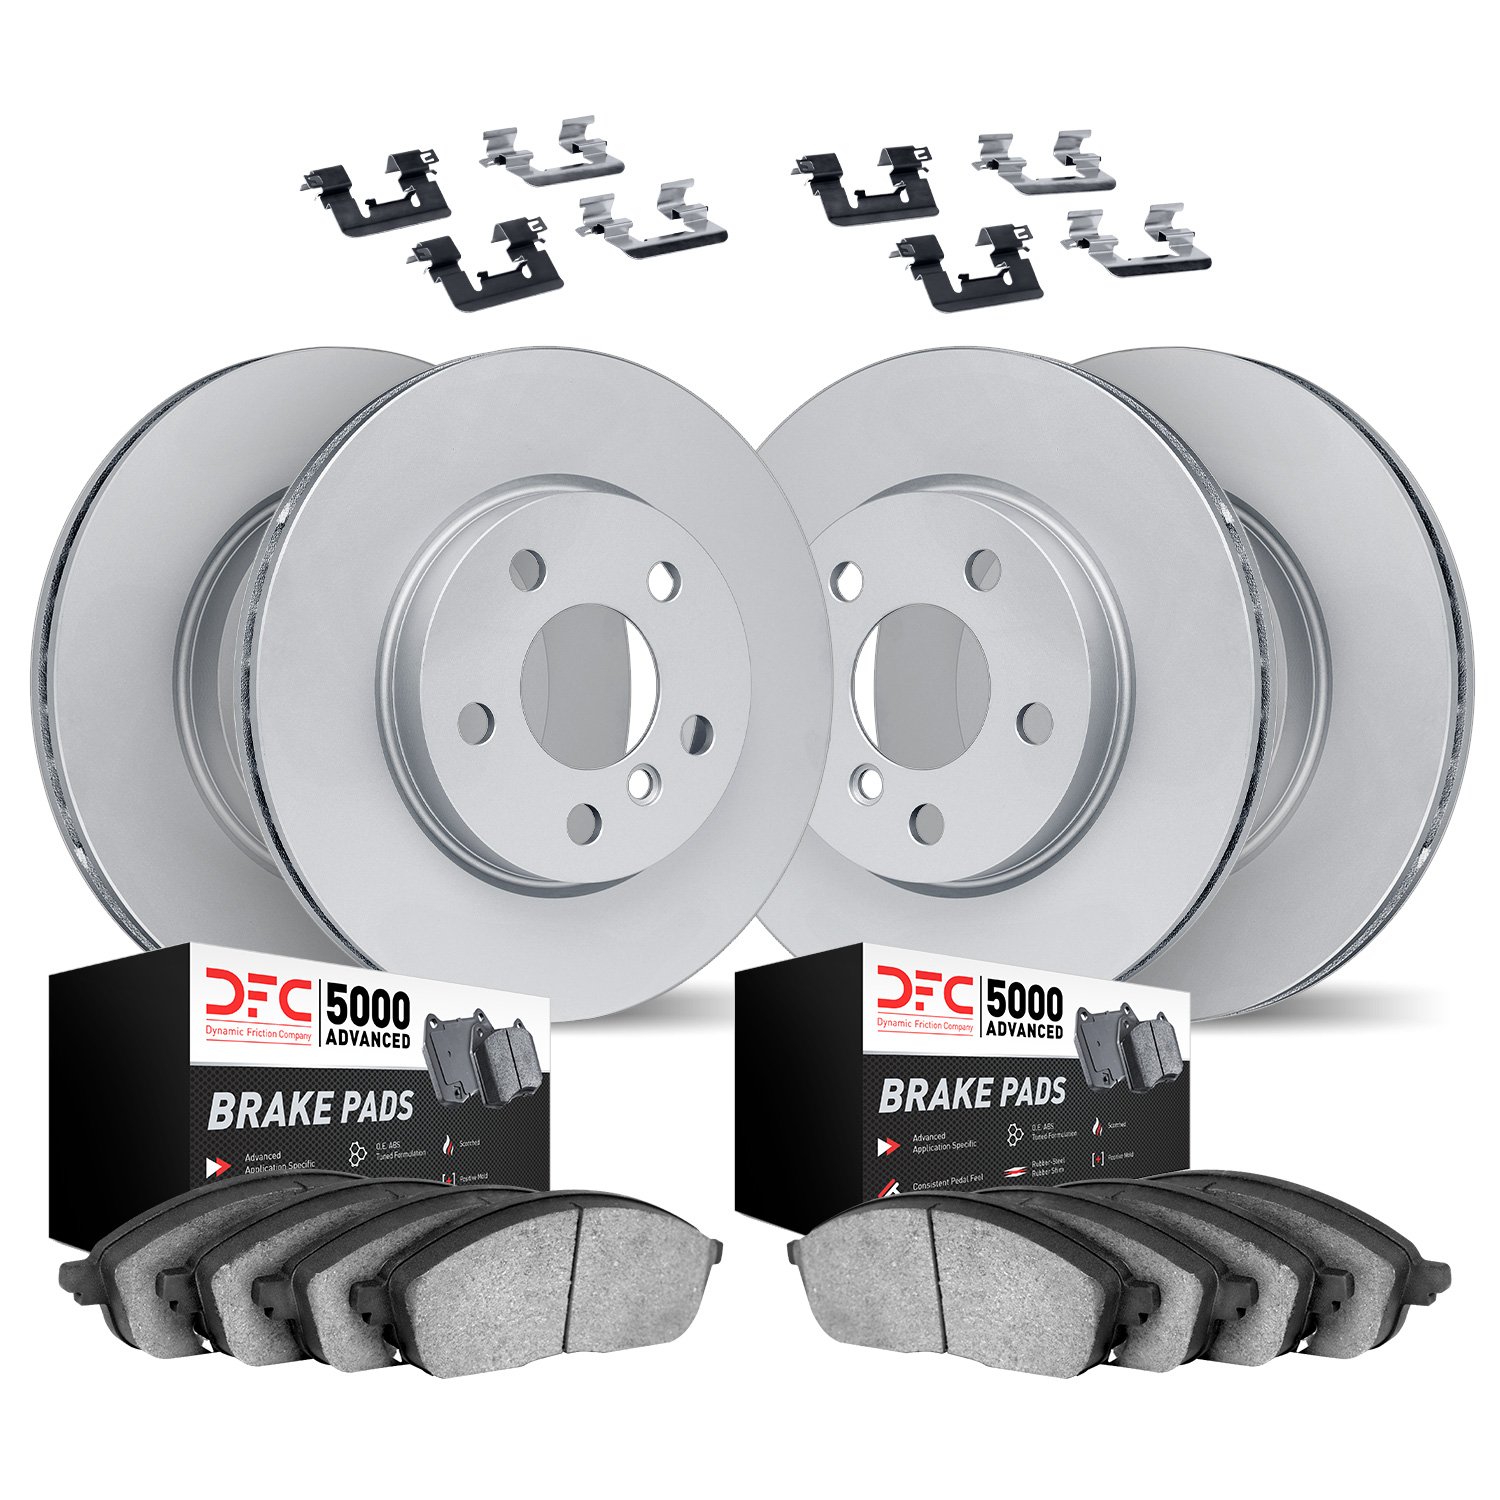 9514-31170 GEOMET Brake Rotors w/5000 Advanced Brake Pads Kit & Hardware, Fits Select BMW, Position: Front and Rear